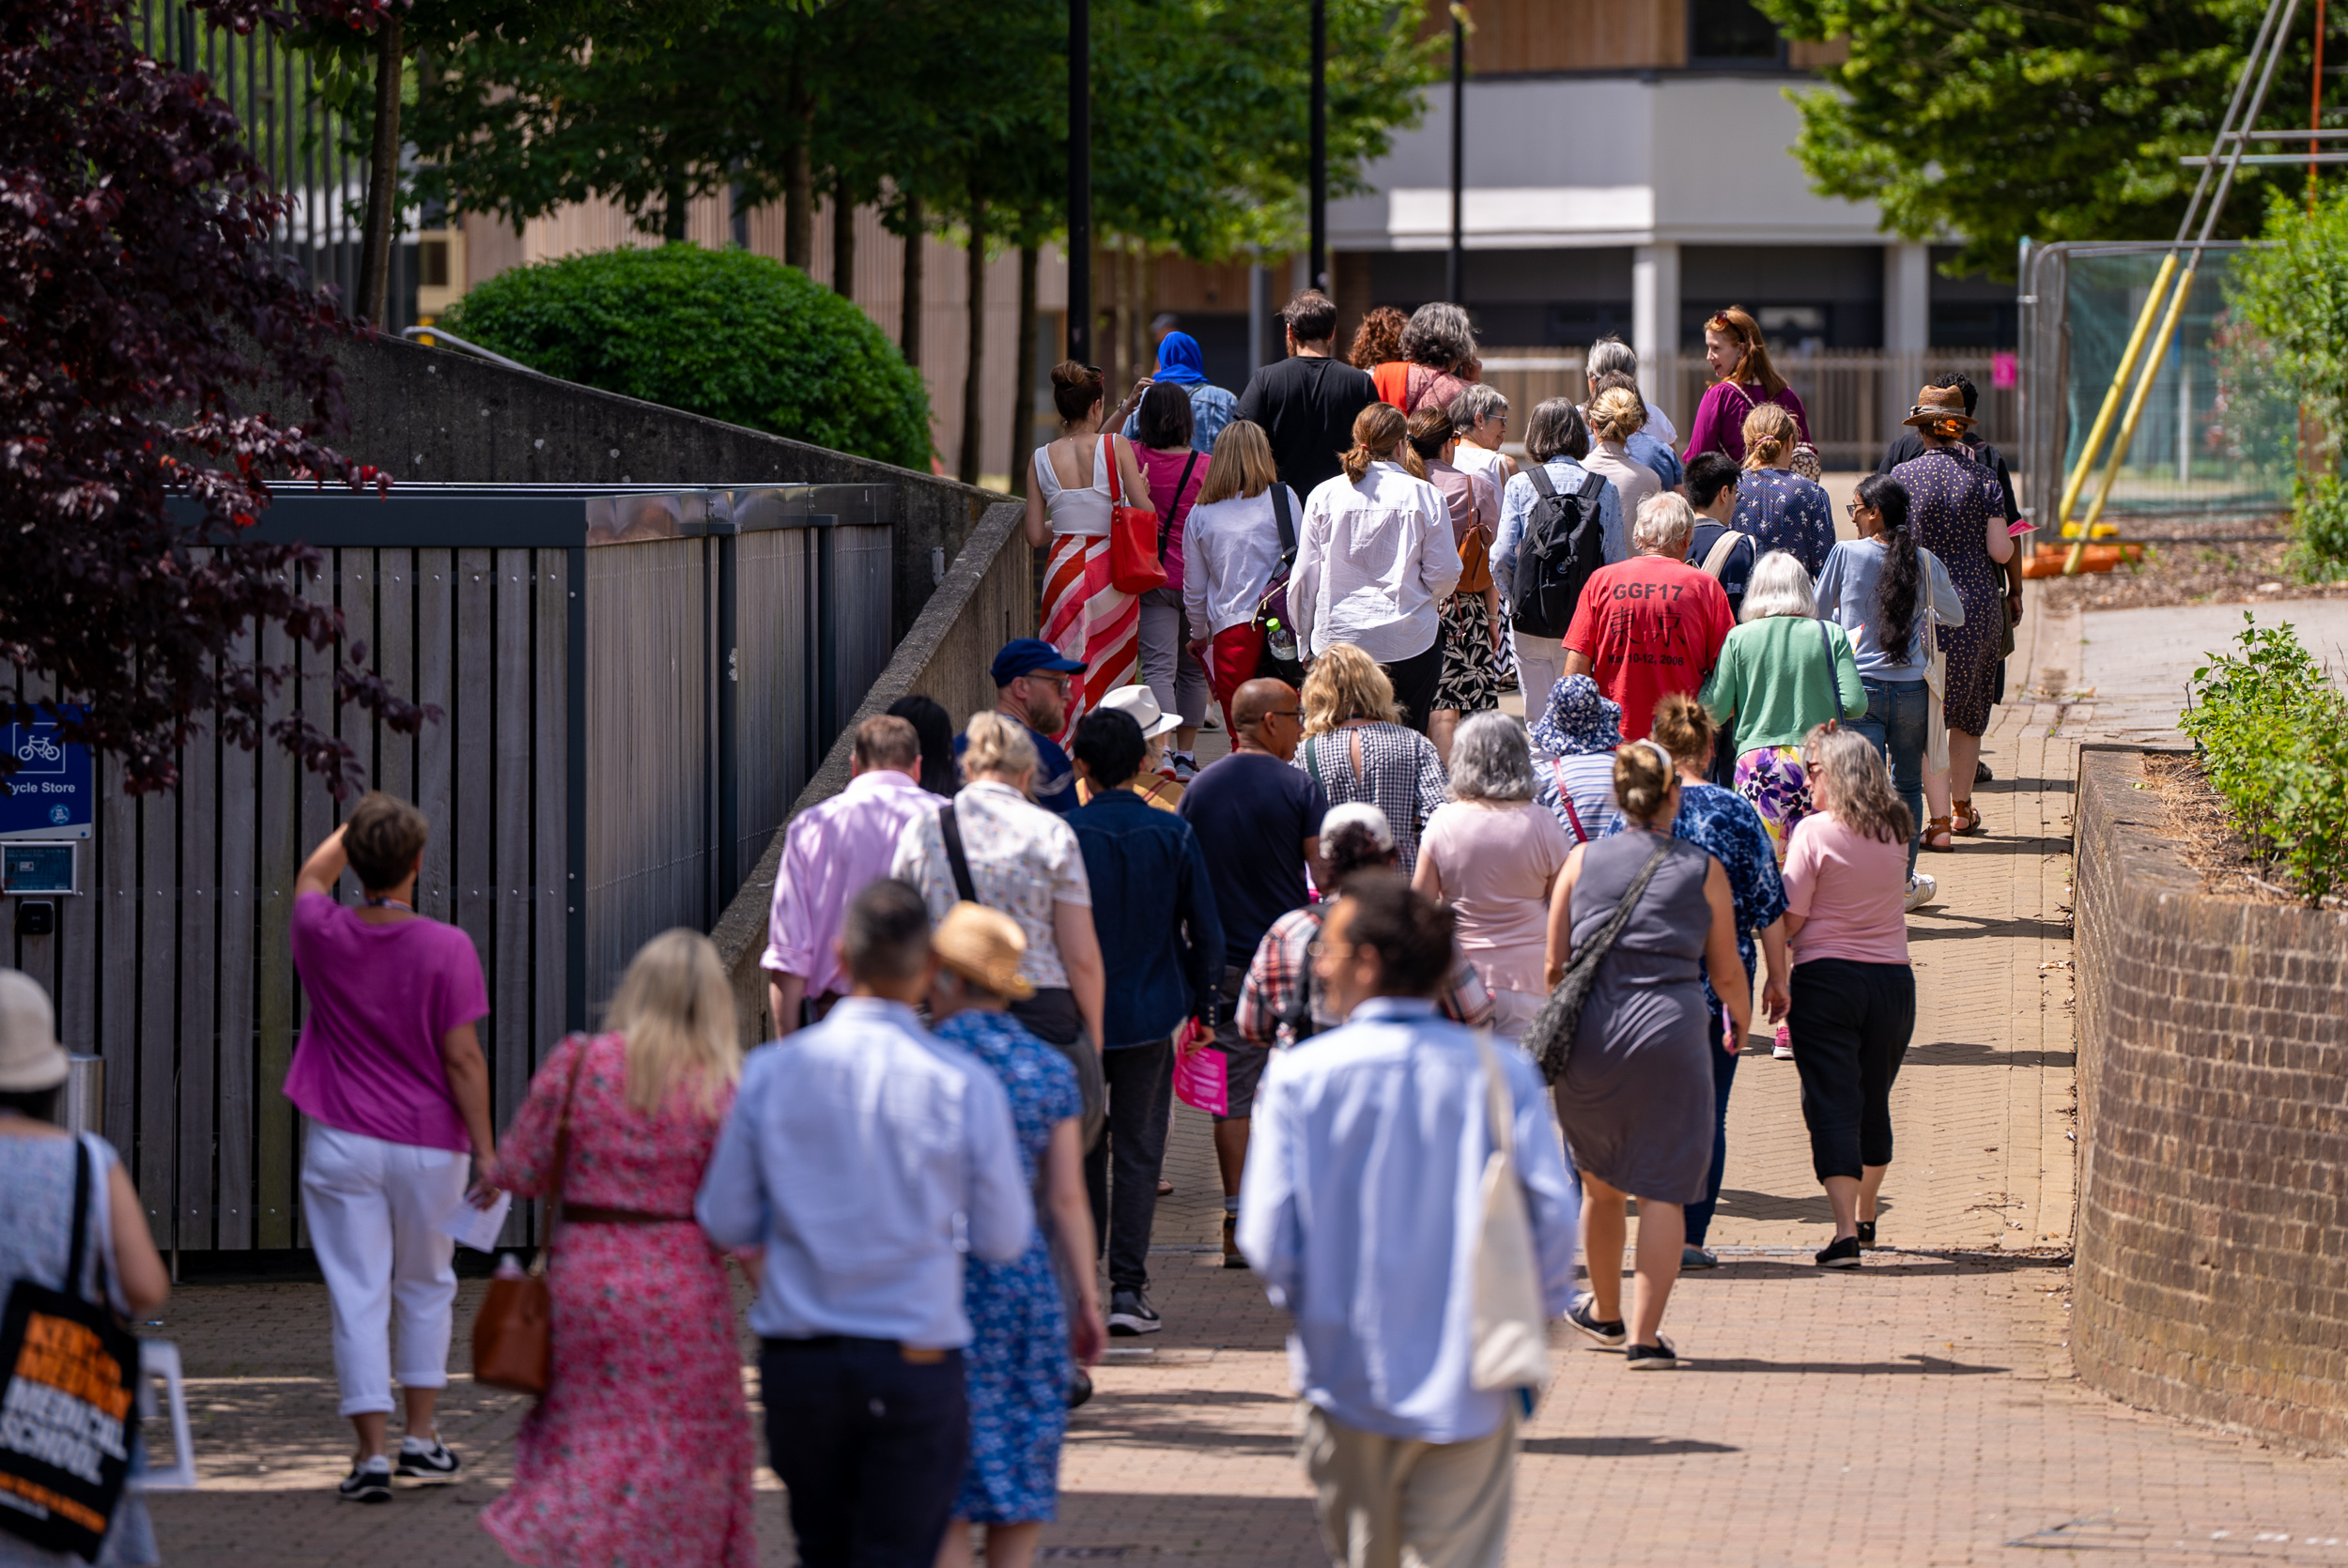 photograph of approximately 40 people walking away from the camera along a pathway, wearing a variety of colourful casual clothing